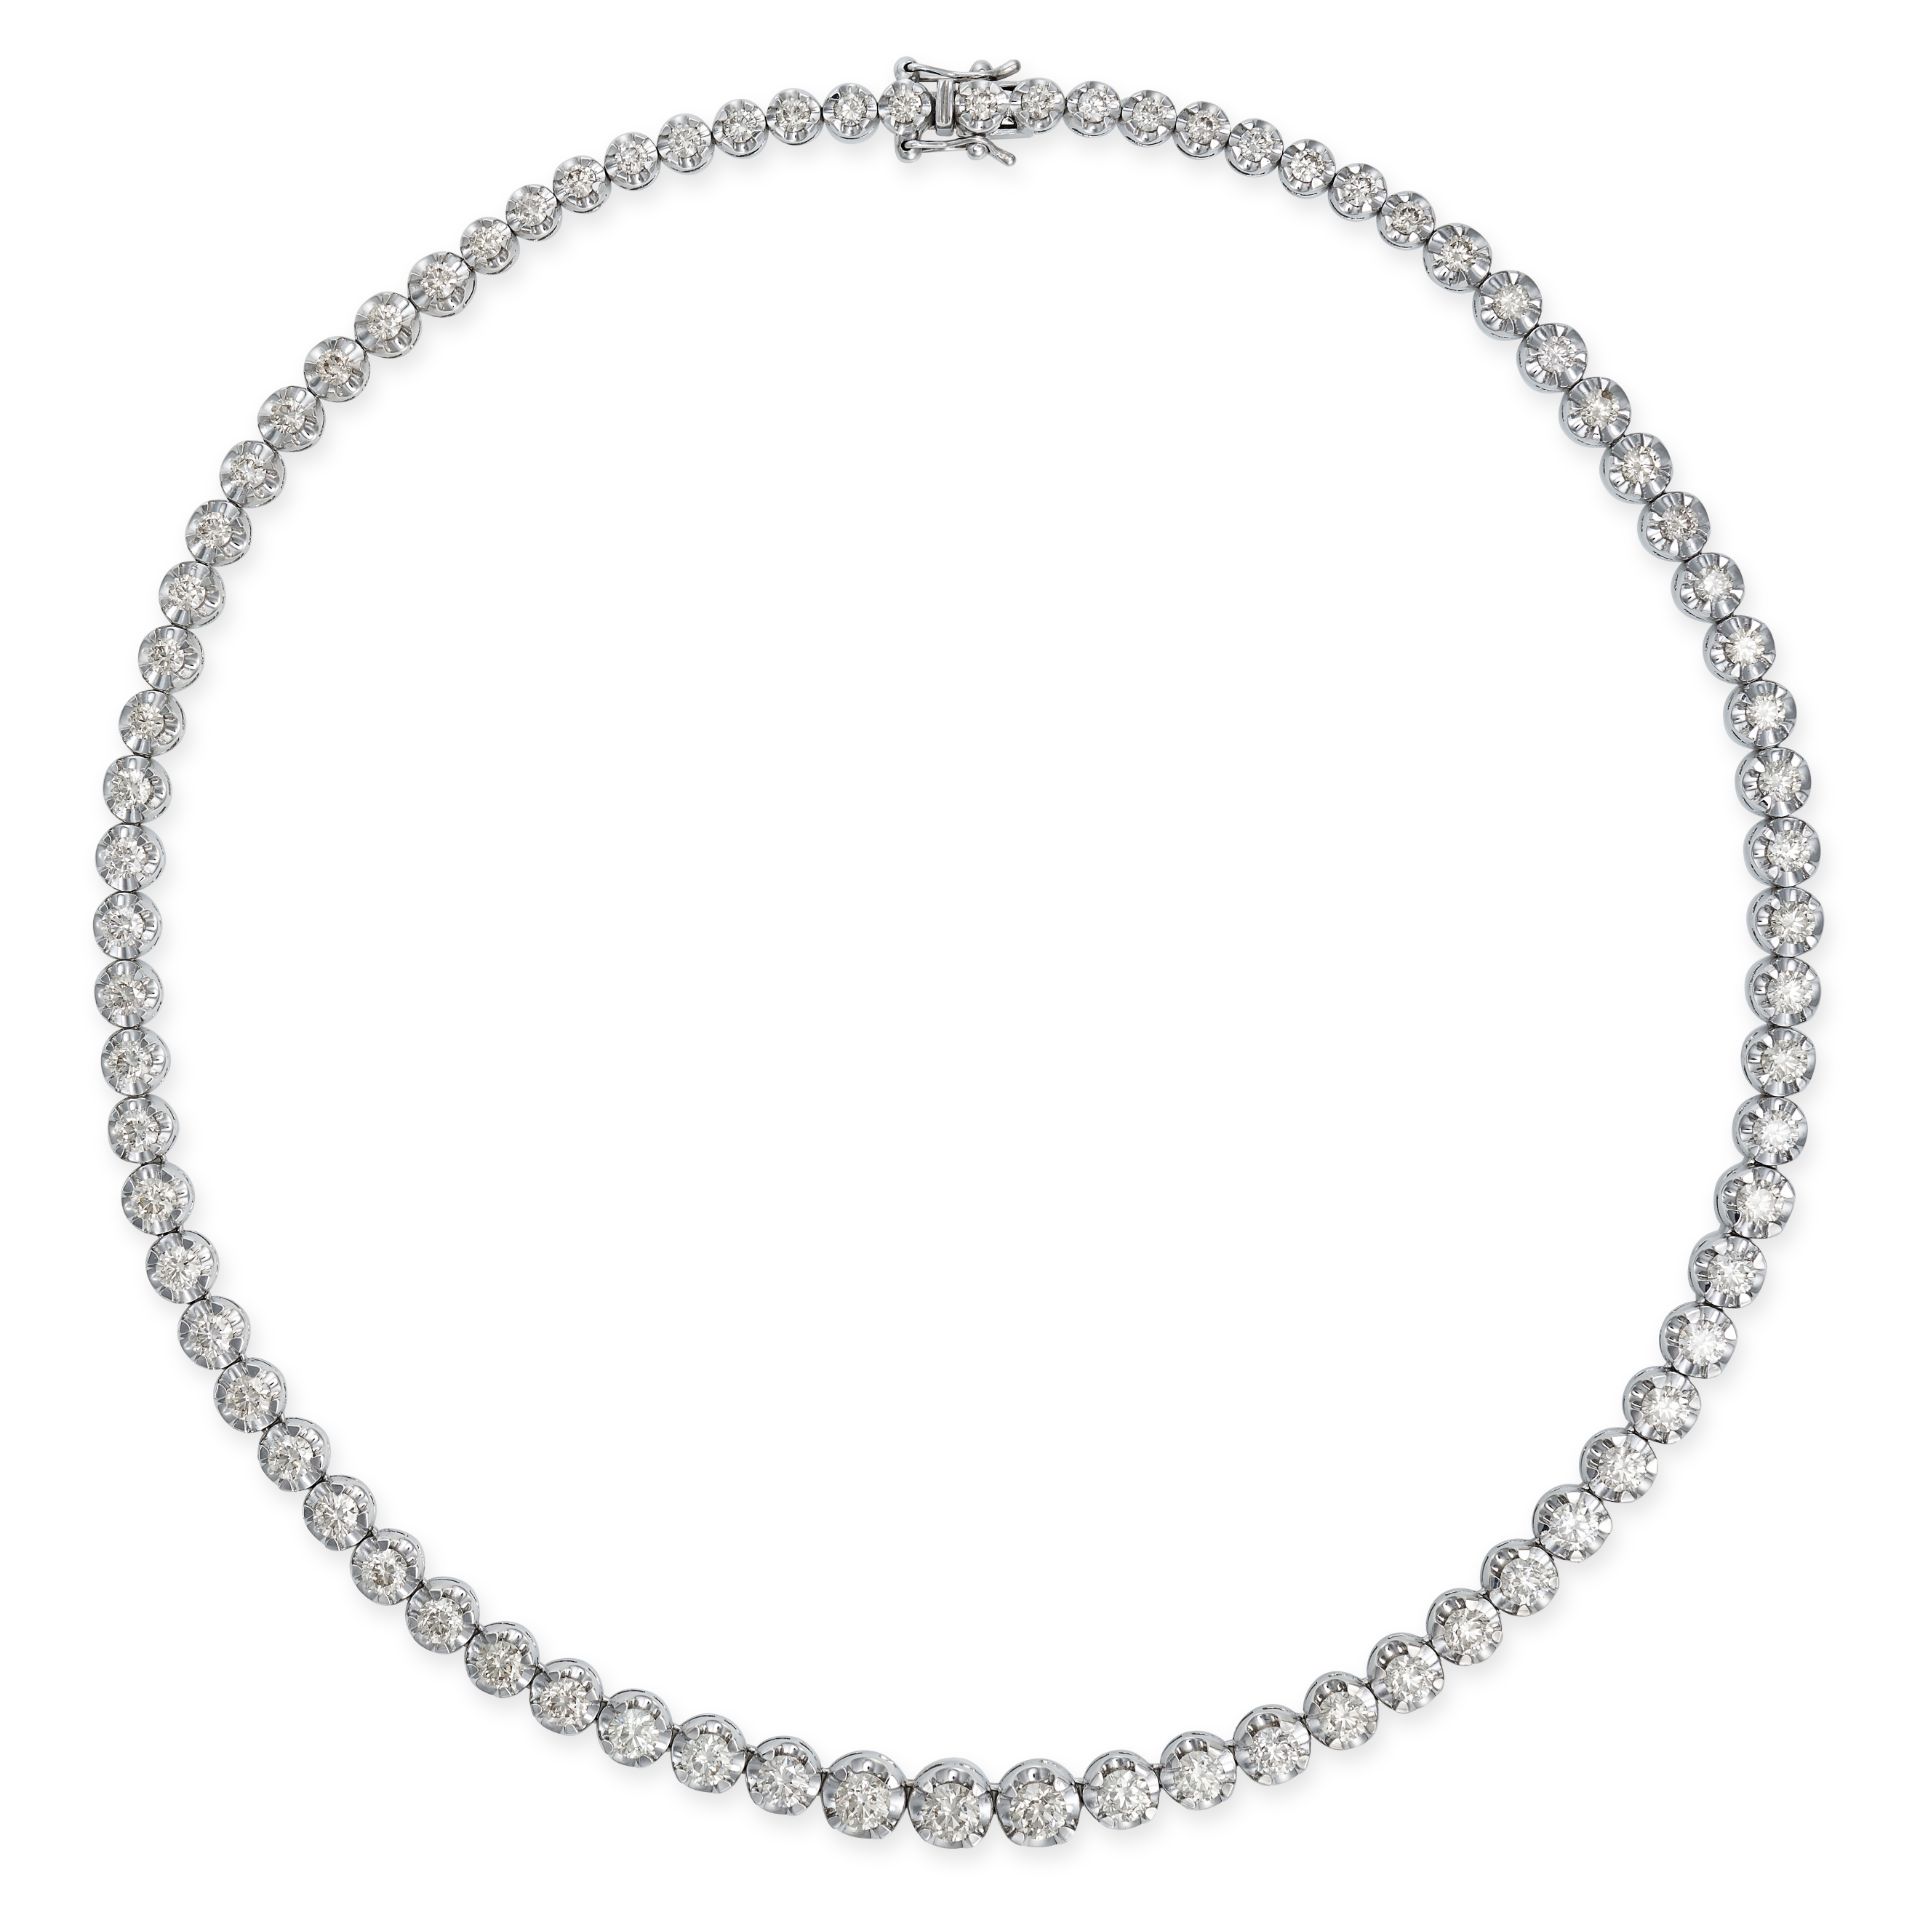 A DIAMOND RIVIERE NECKLACE in 14ct white gold, set with a single row of graduating round brillian...